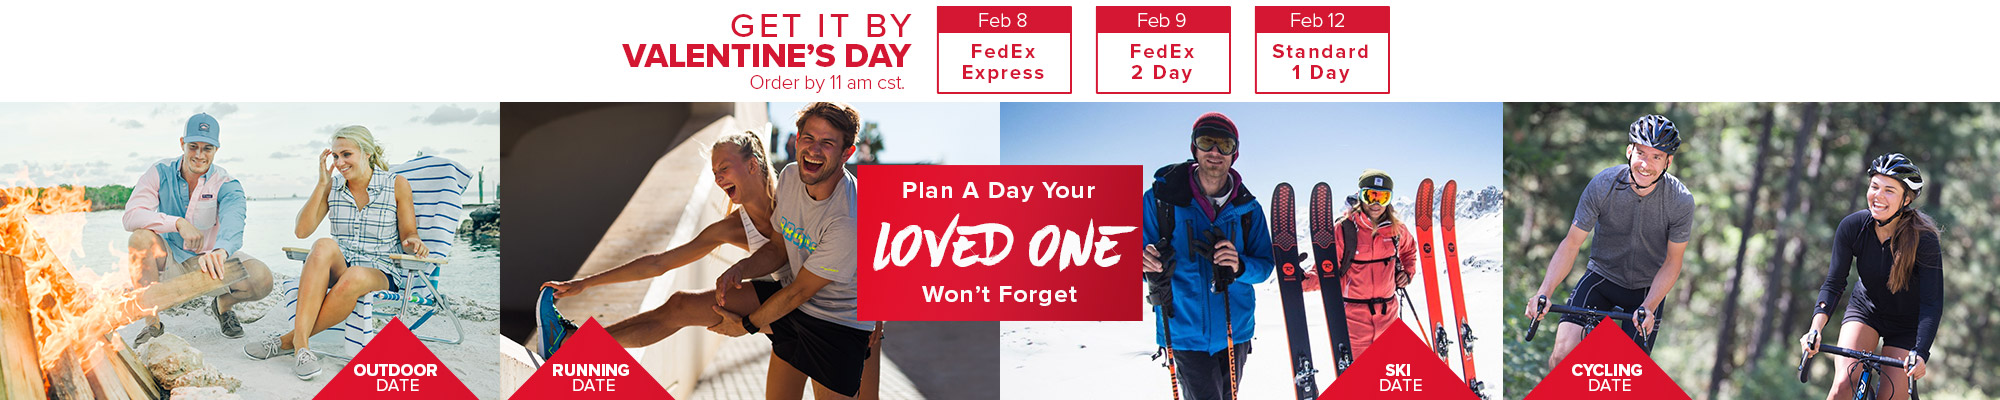 Plan a day your loved one wont forget.